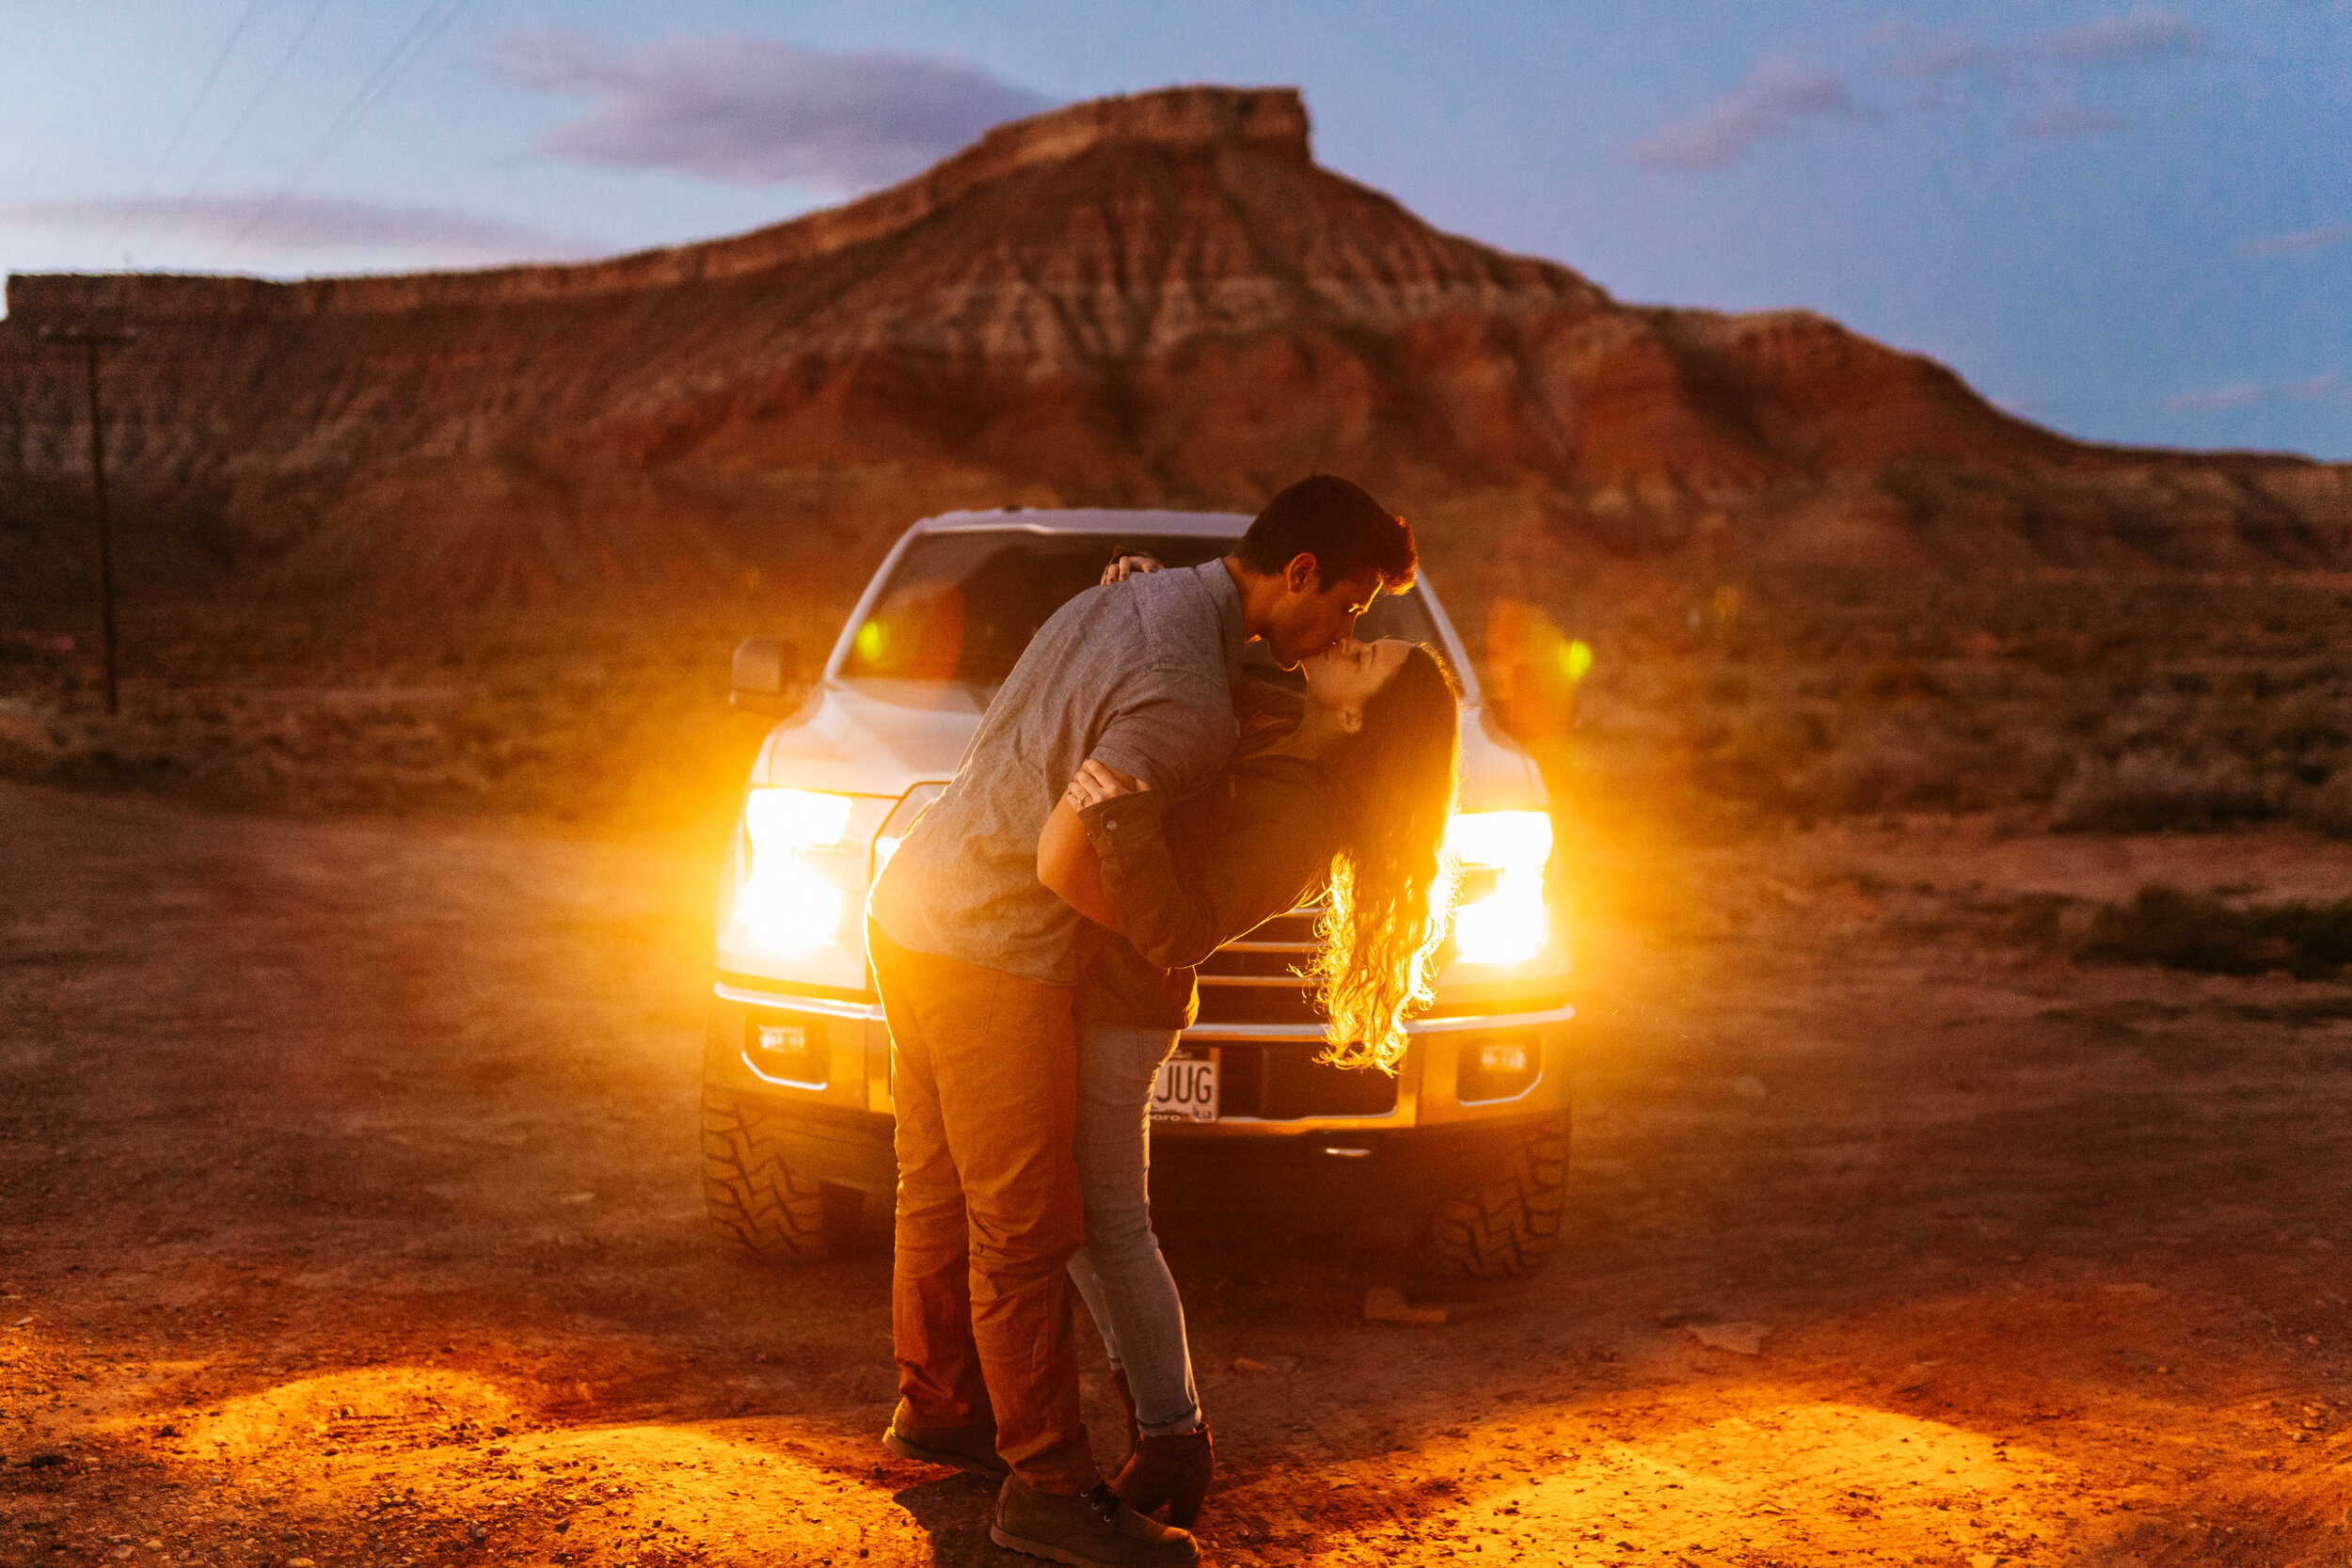 Kylee + Andrew - Zion National Park, Utah Canyon Overlook Adventure Session138.jpg